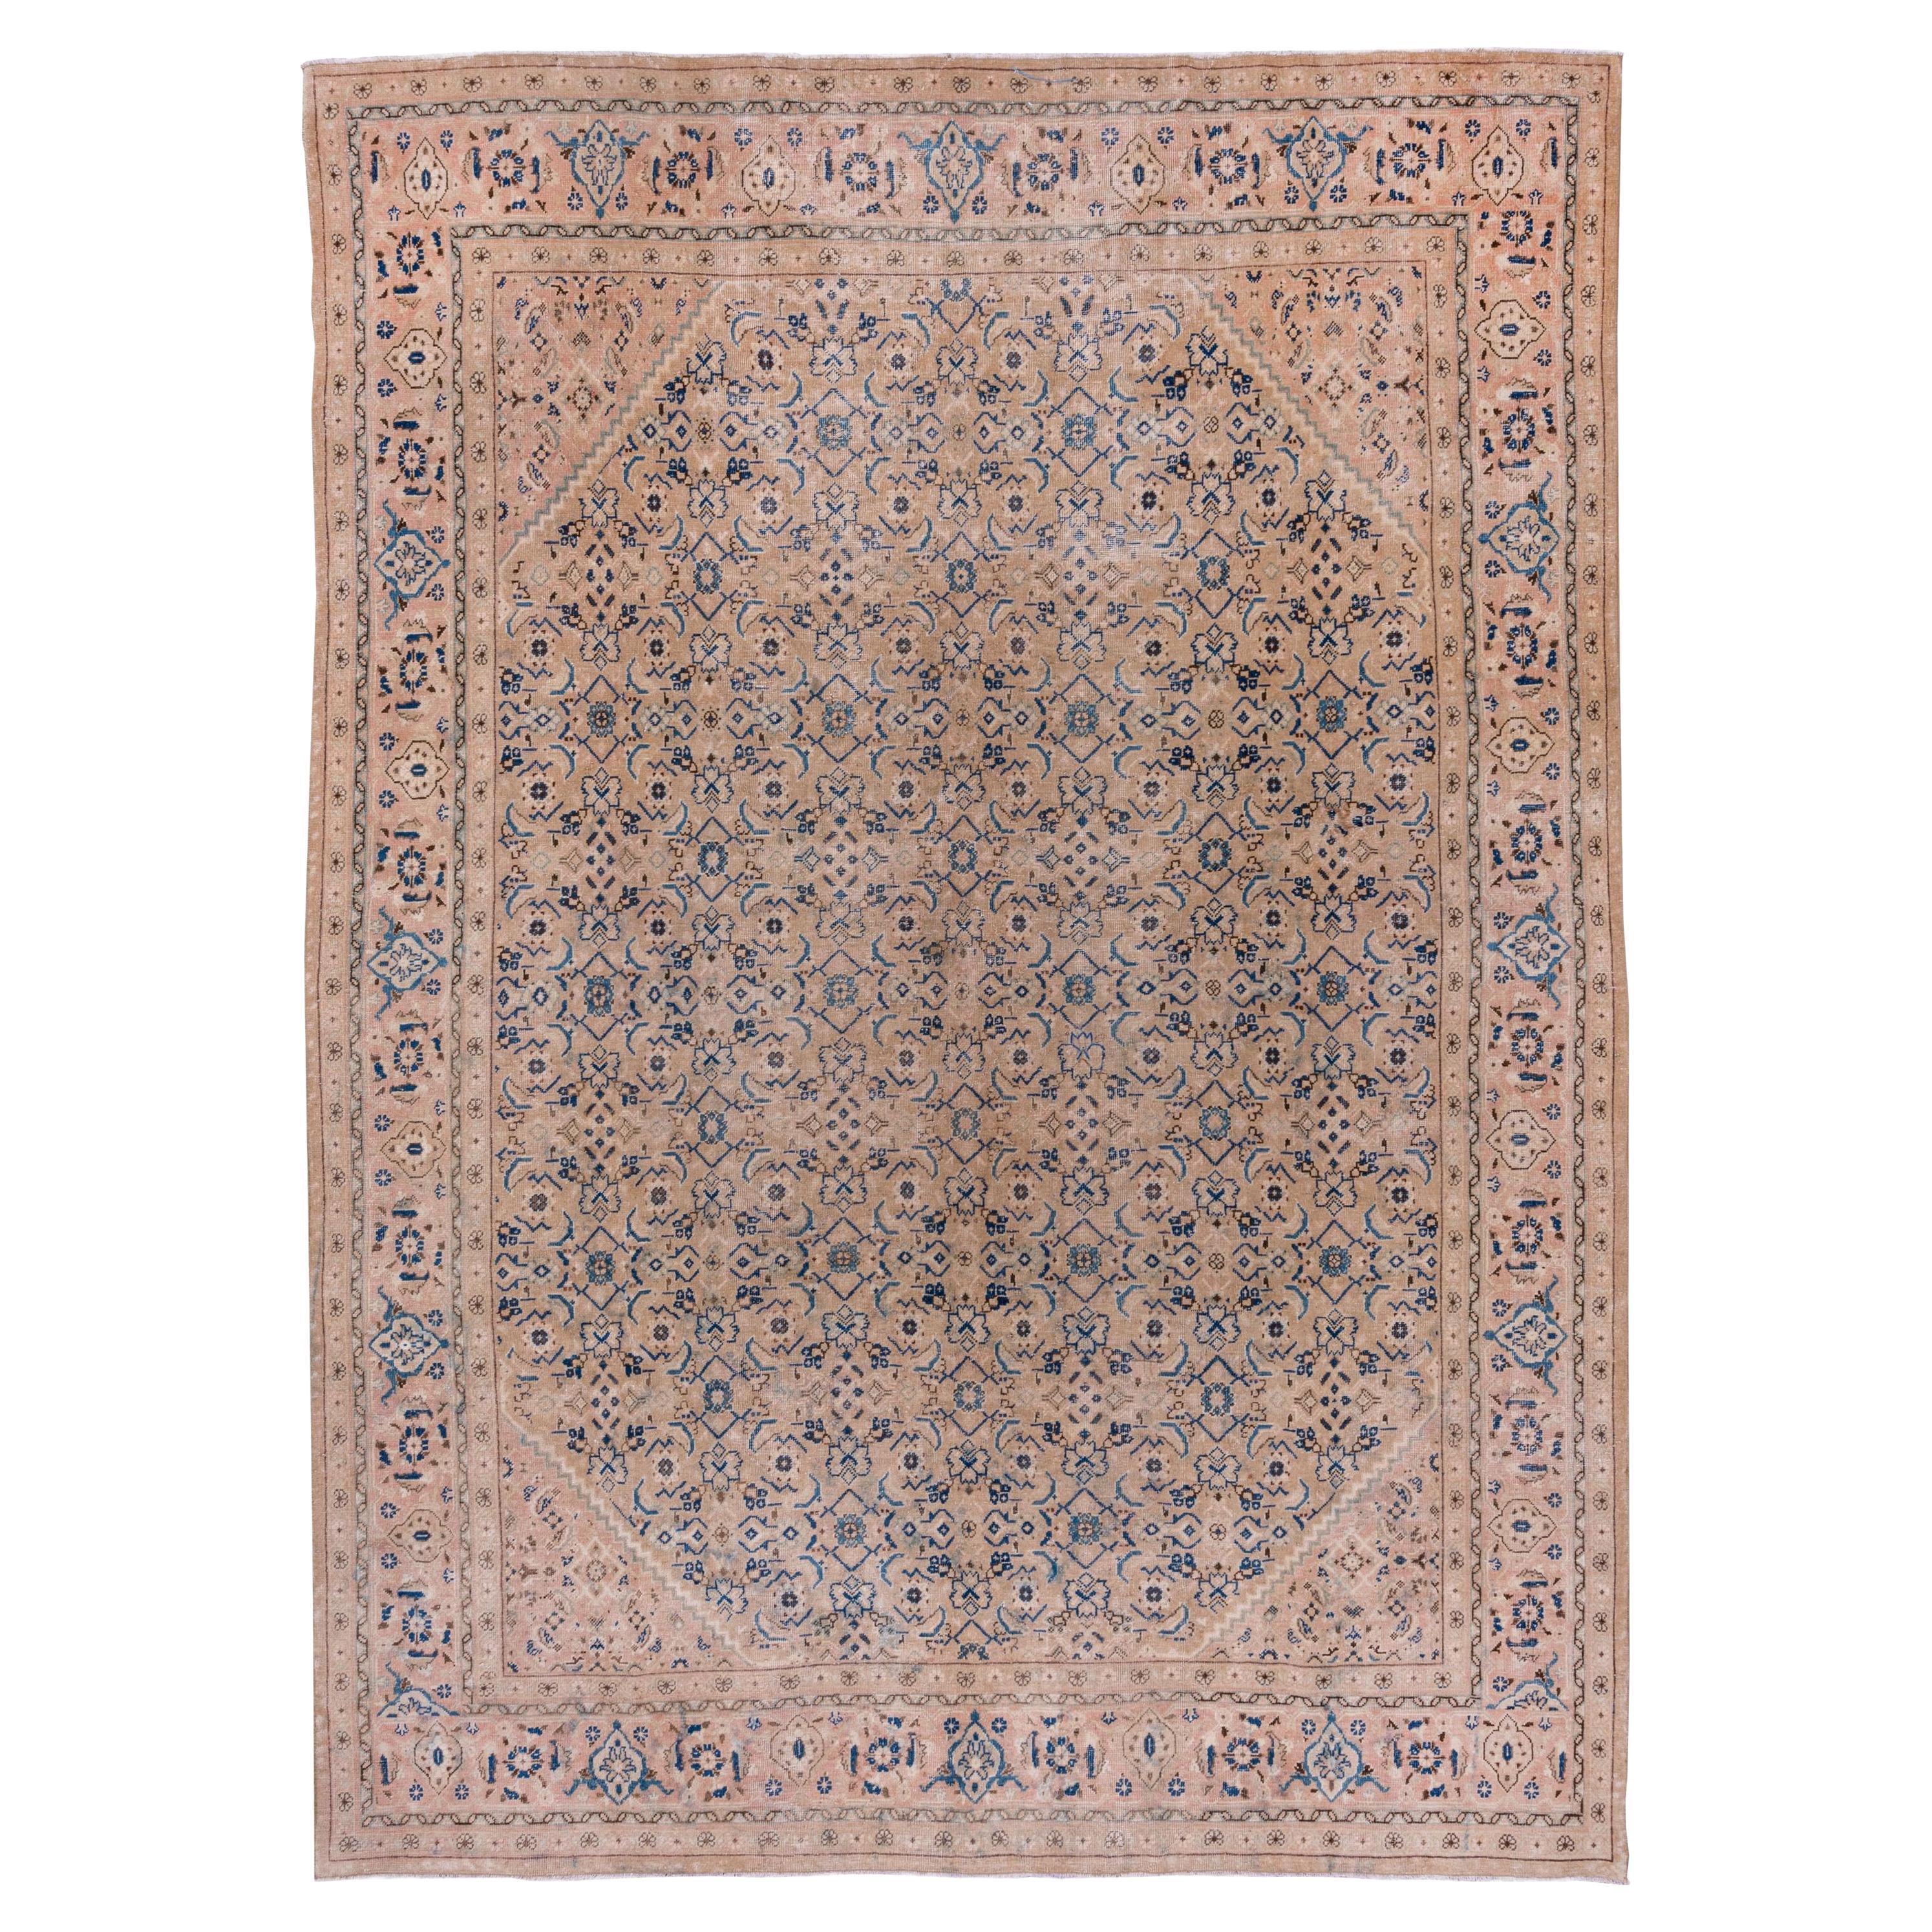 Tapis persan Mahal, palette claire